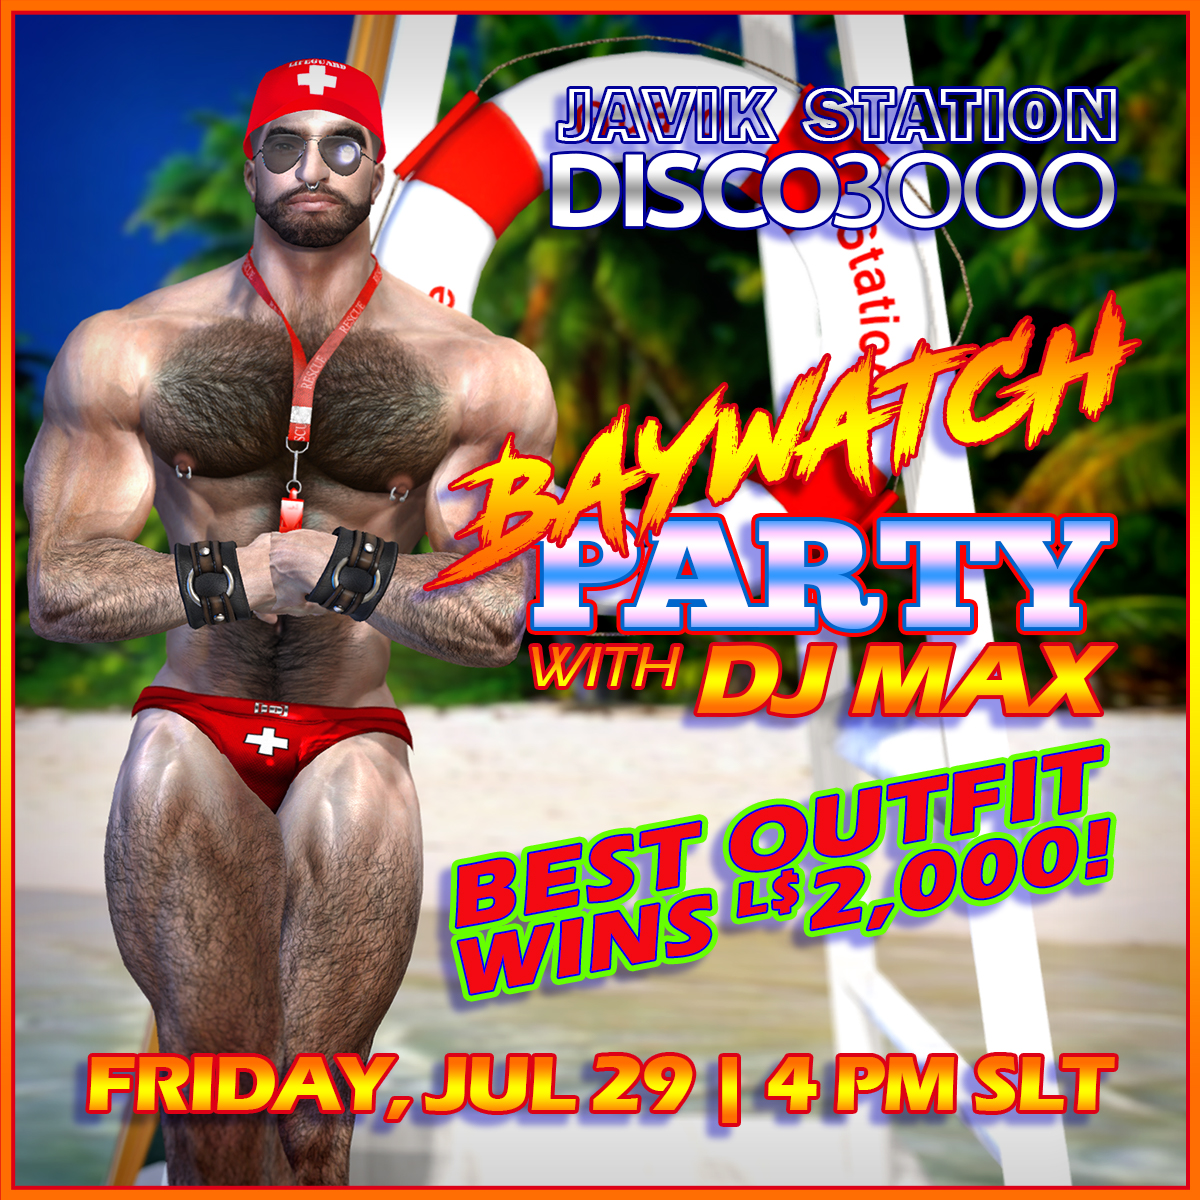 DISCO 3000 Baywatch Party